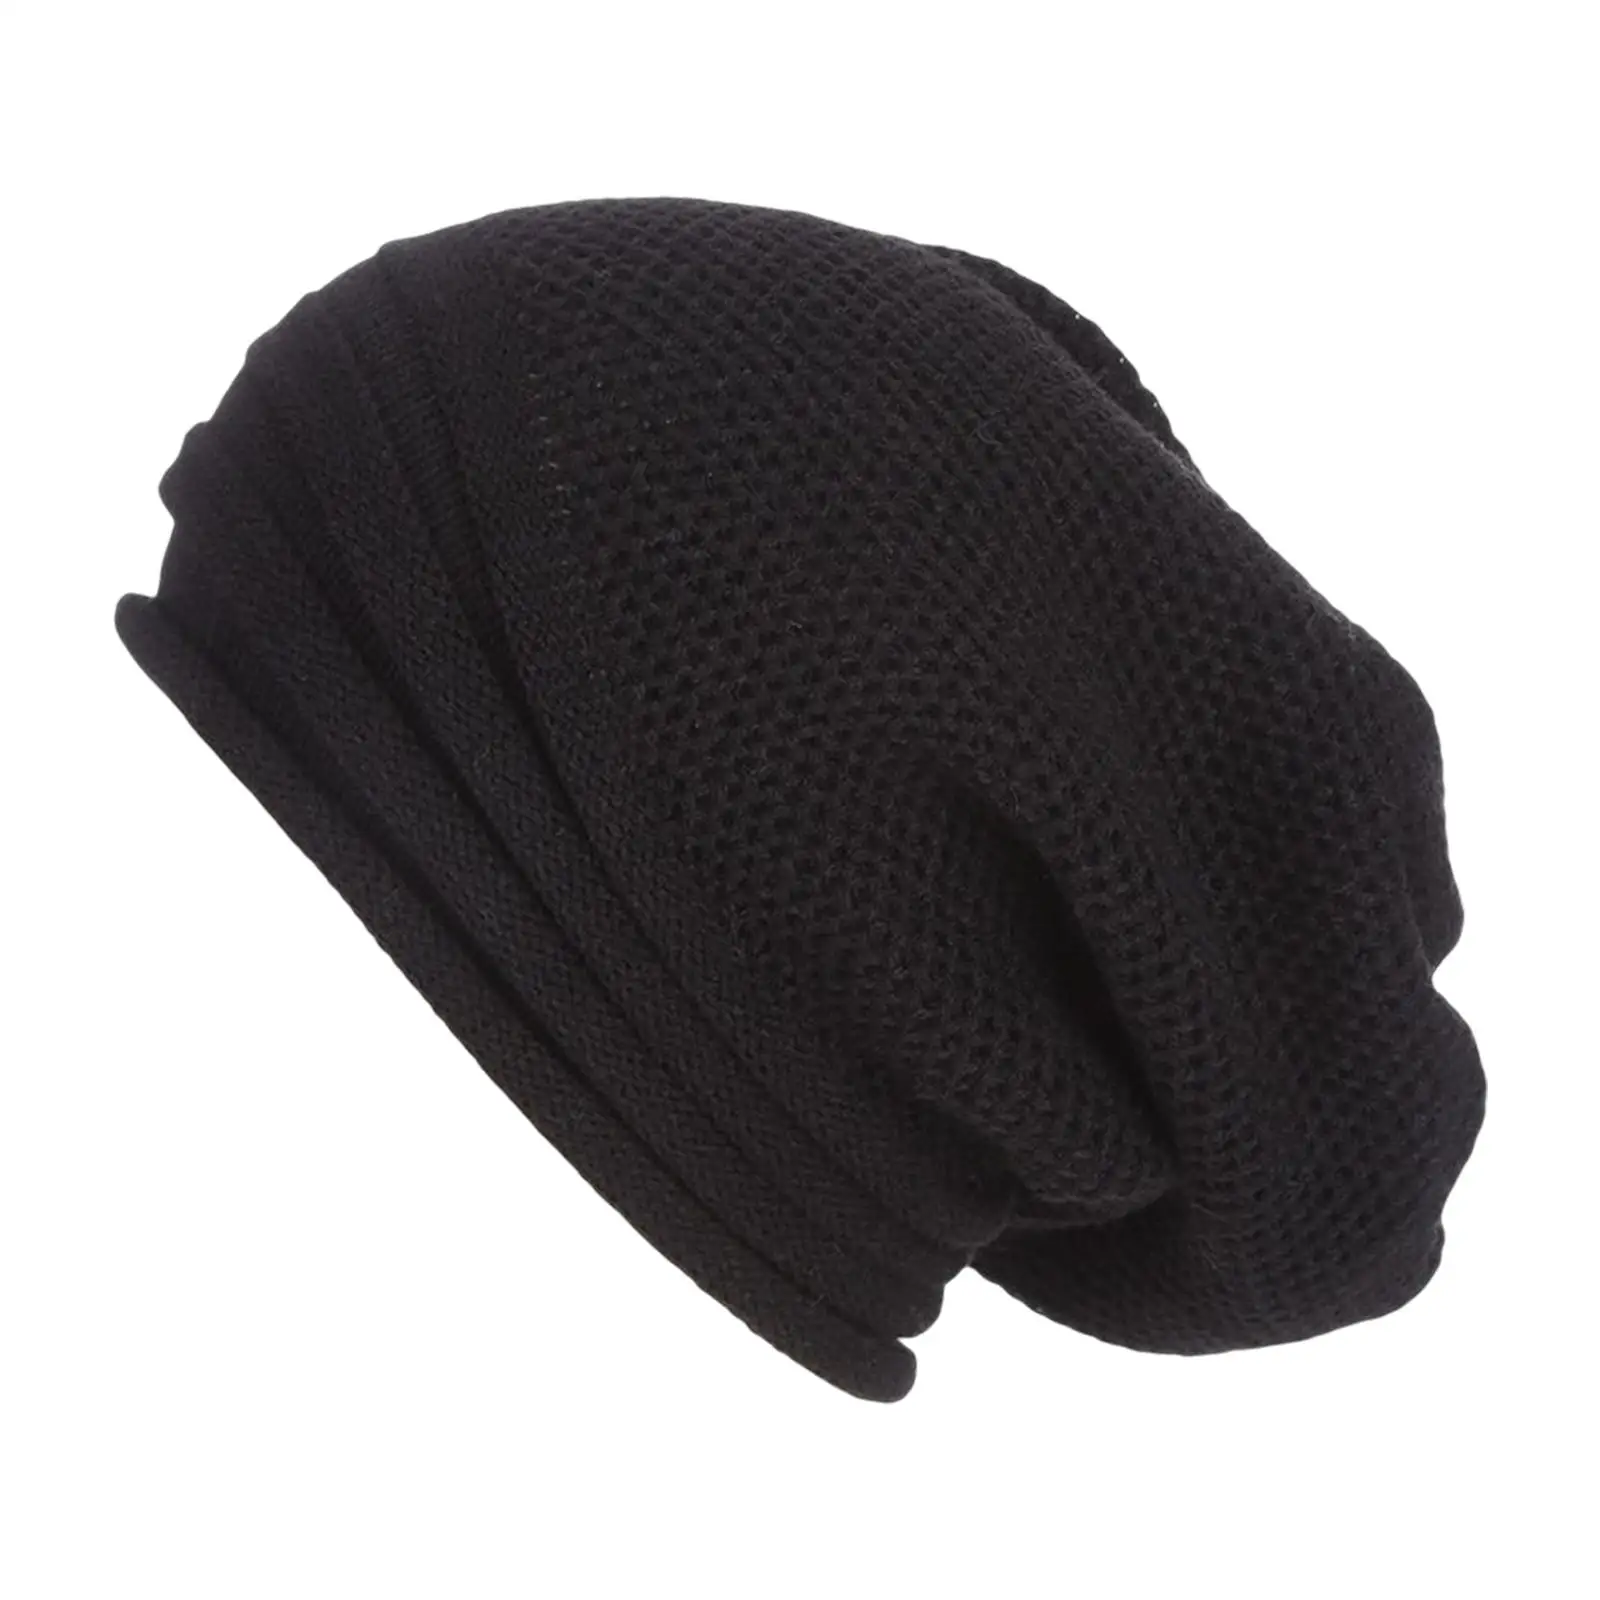 Casual Winter Beanie Hats Slouchy Thick Warm Knit Oversized Lightweight Soft for Running Sport Outdoor Adults Men Women